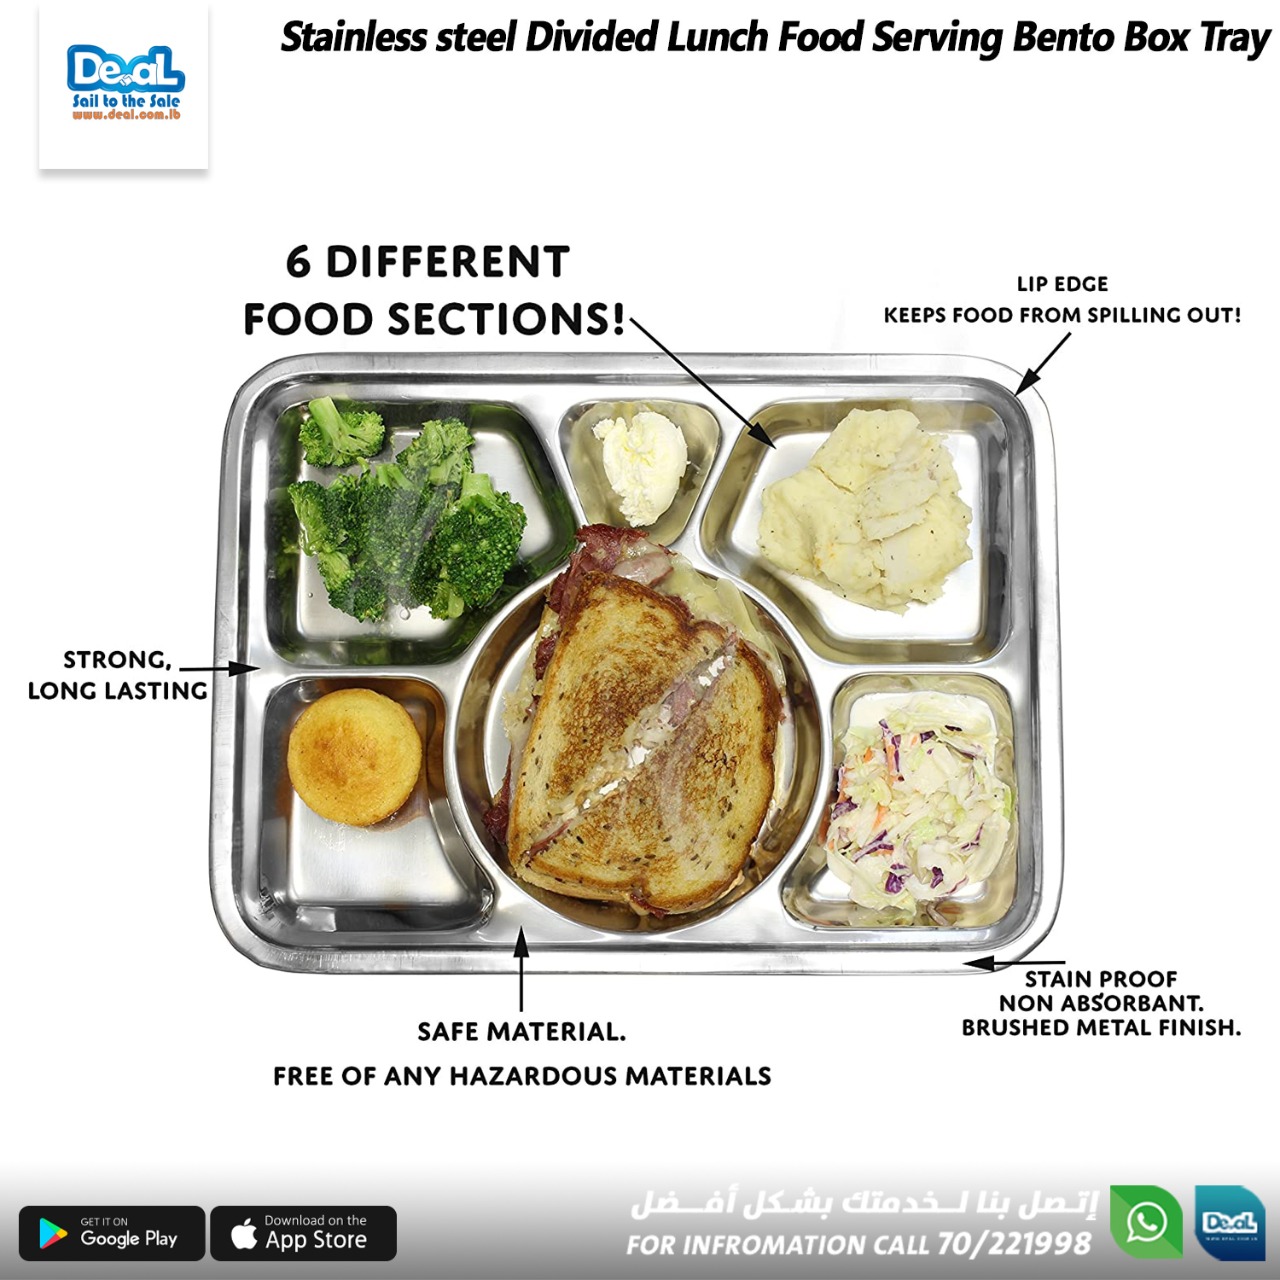 Stainless+steel+Divided+Lunch+Food+Serving+Bento+Box+Tray